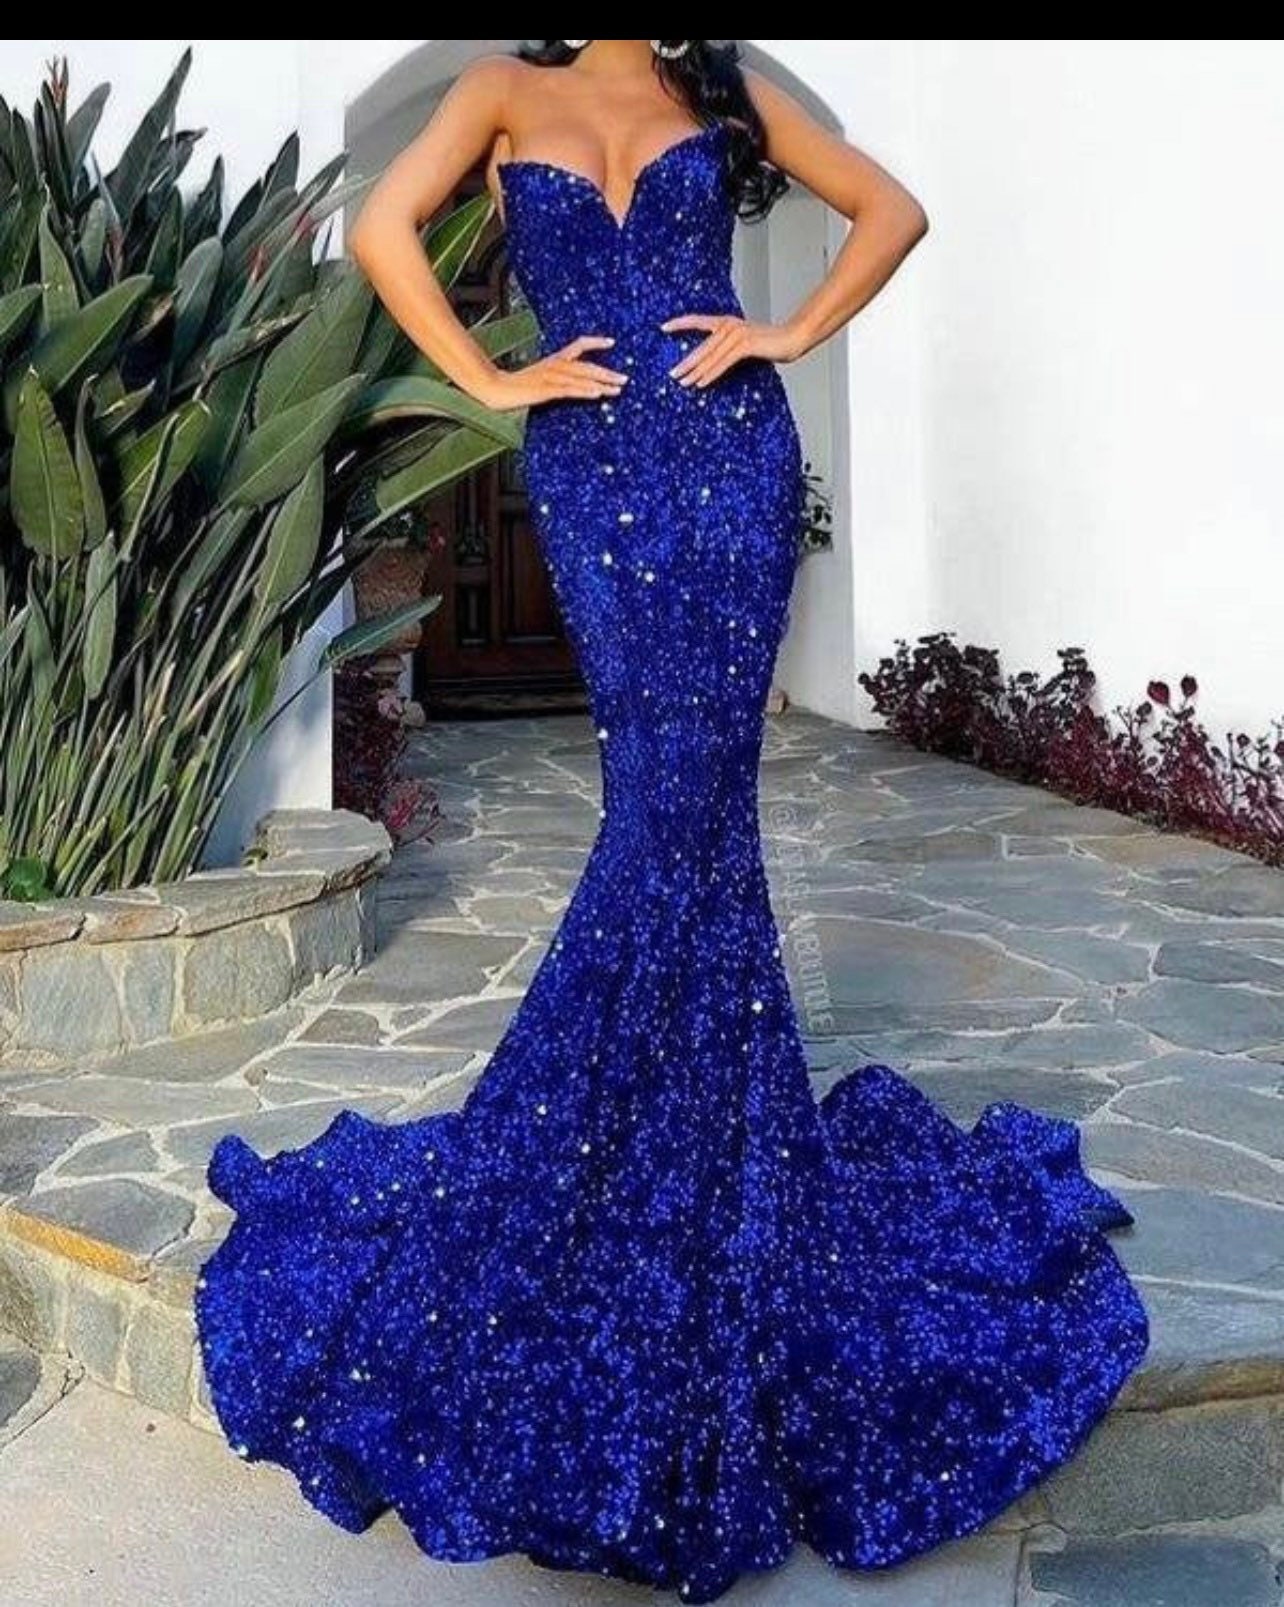 Blue Sequin Gown -  Canada